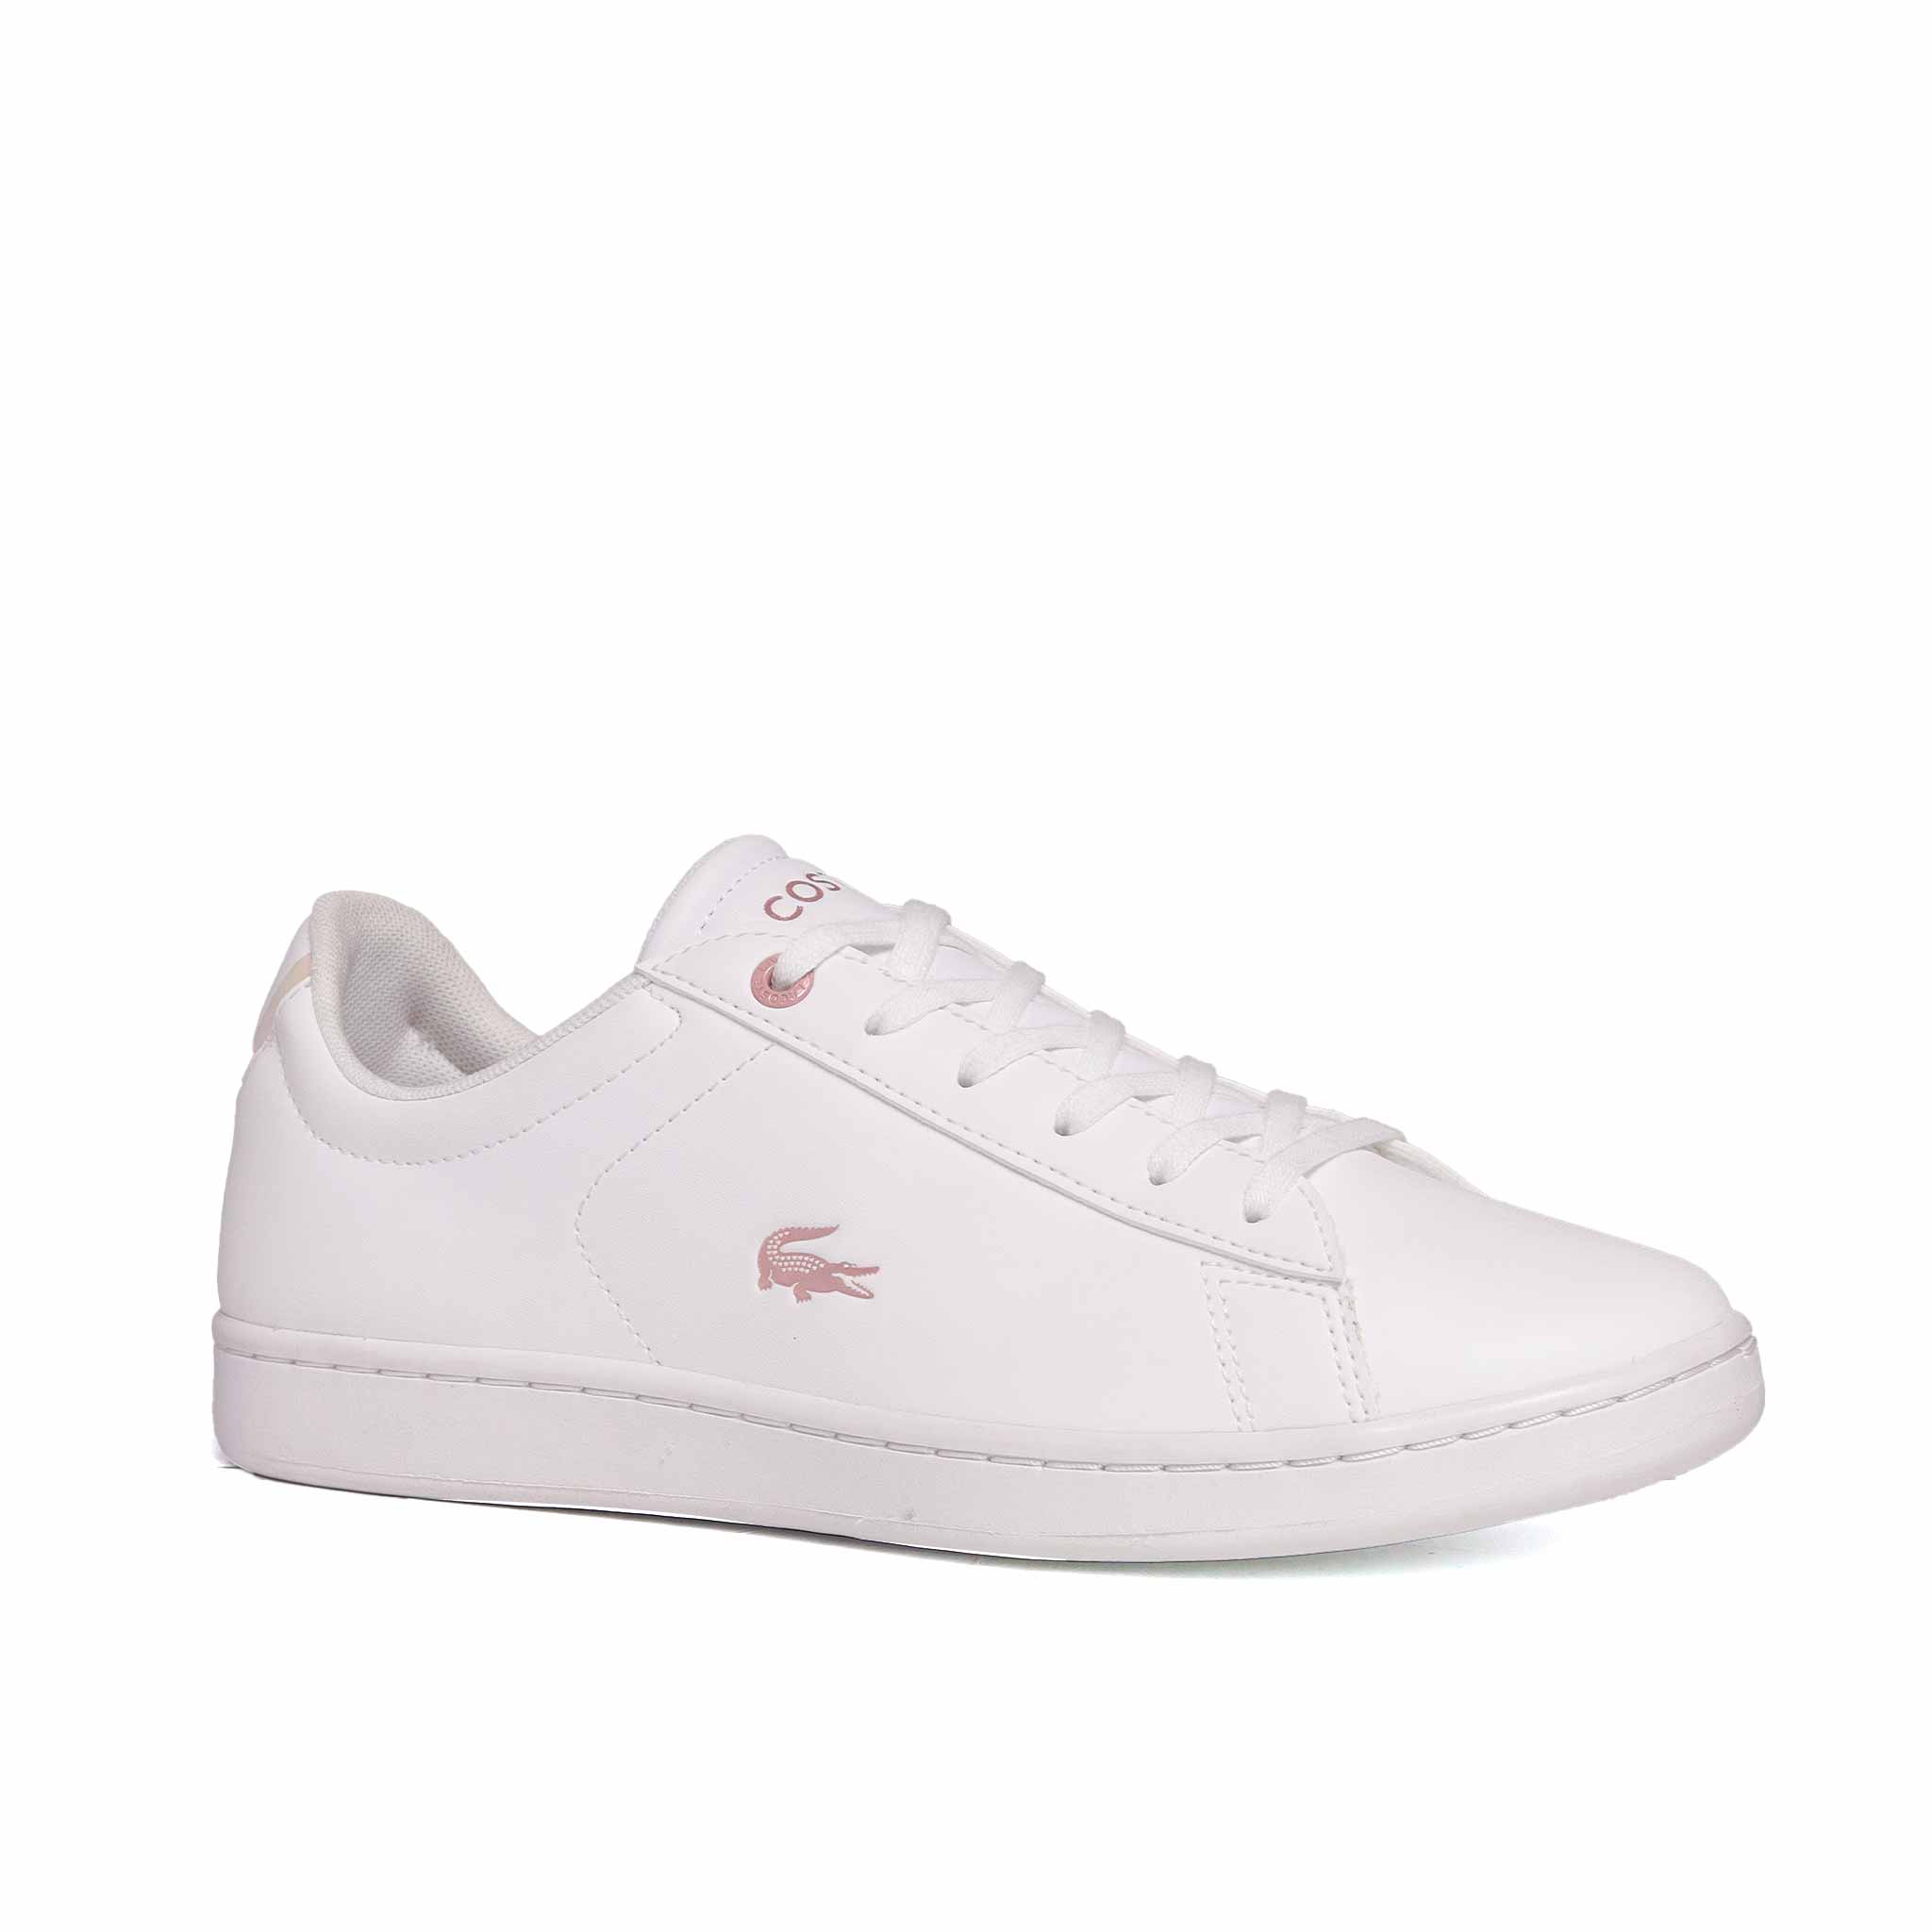 Tenis Lacoste Carnaby Mujer 7-41SUJ00021Y9 Casual